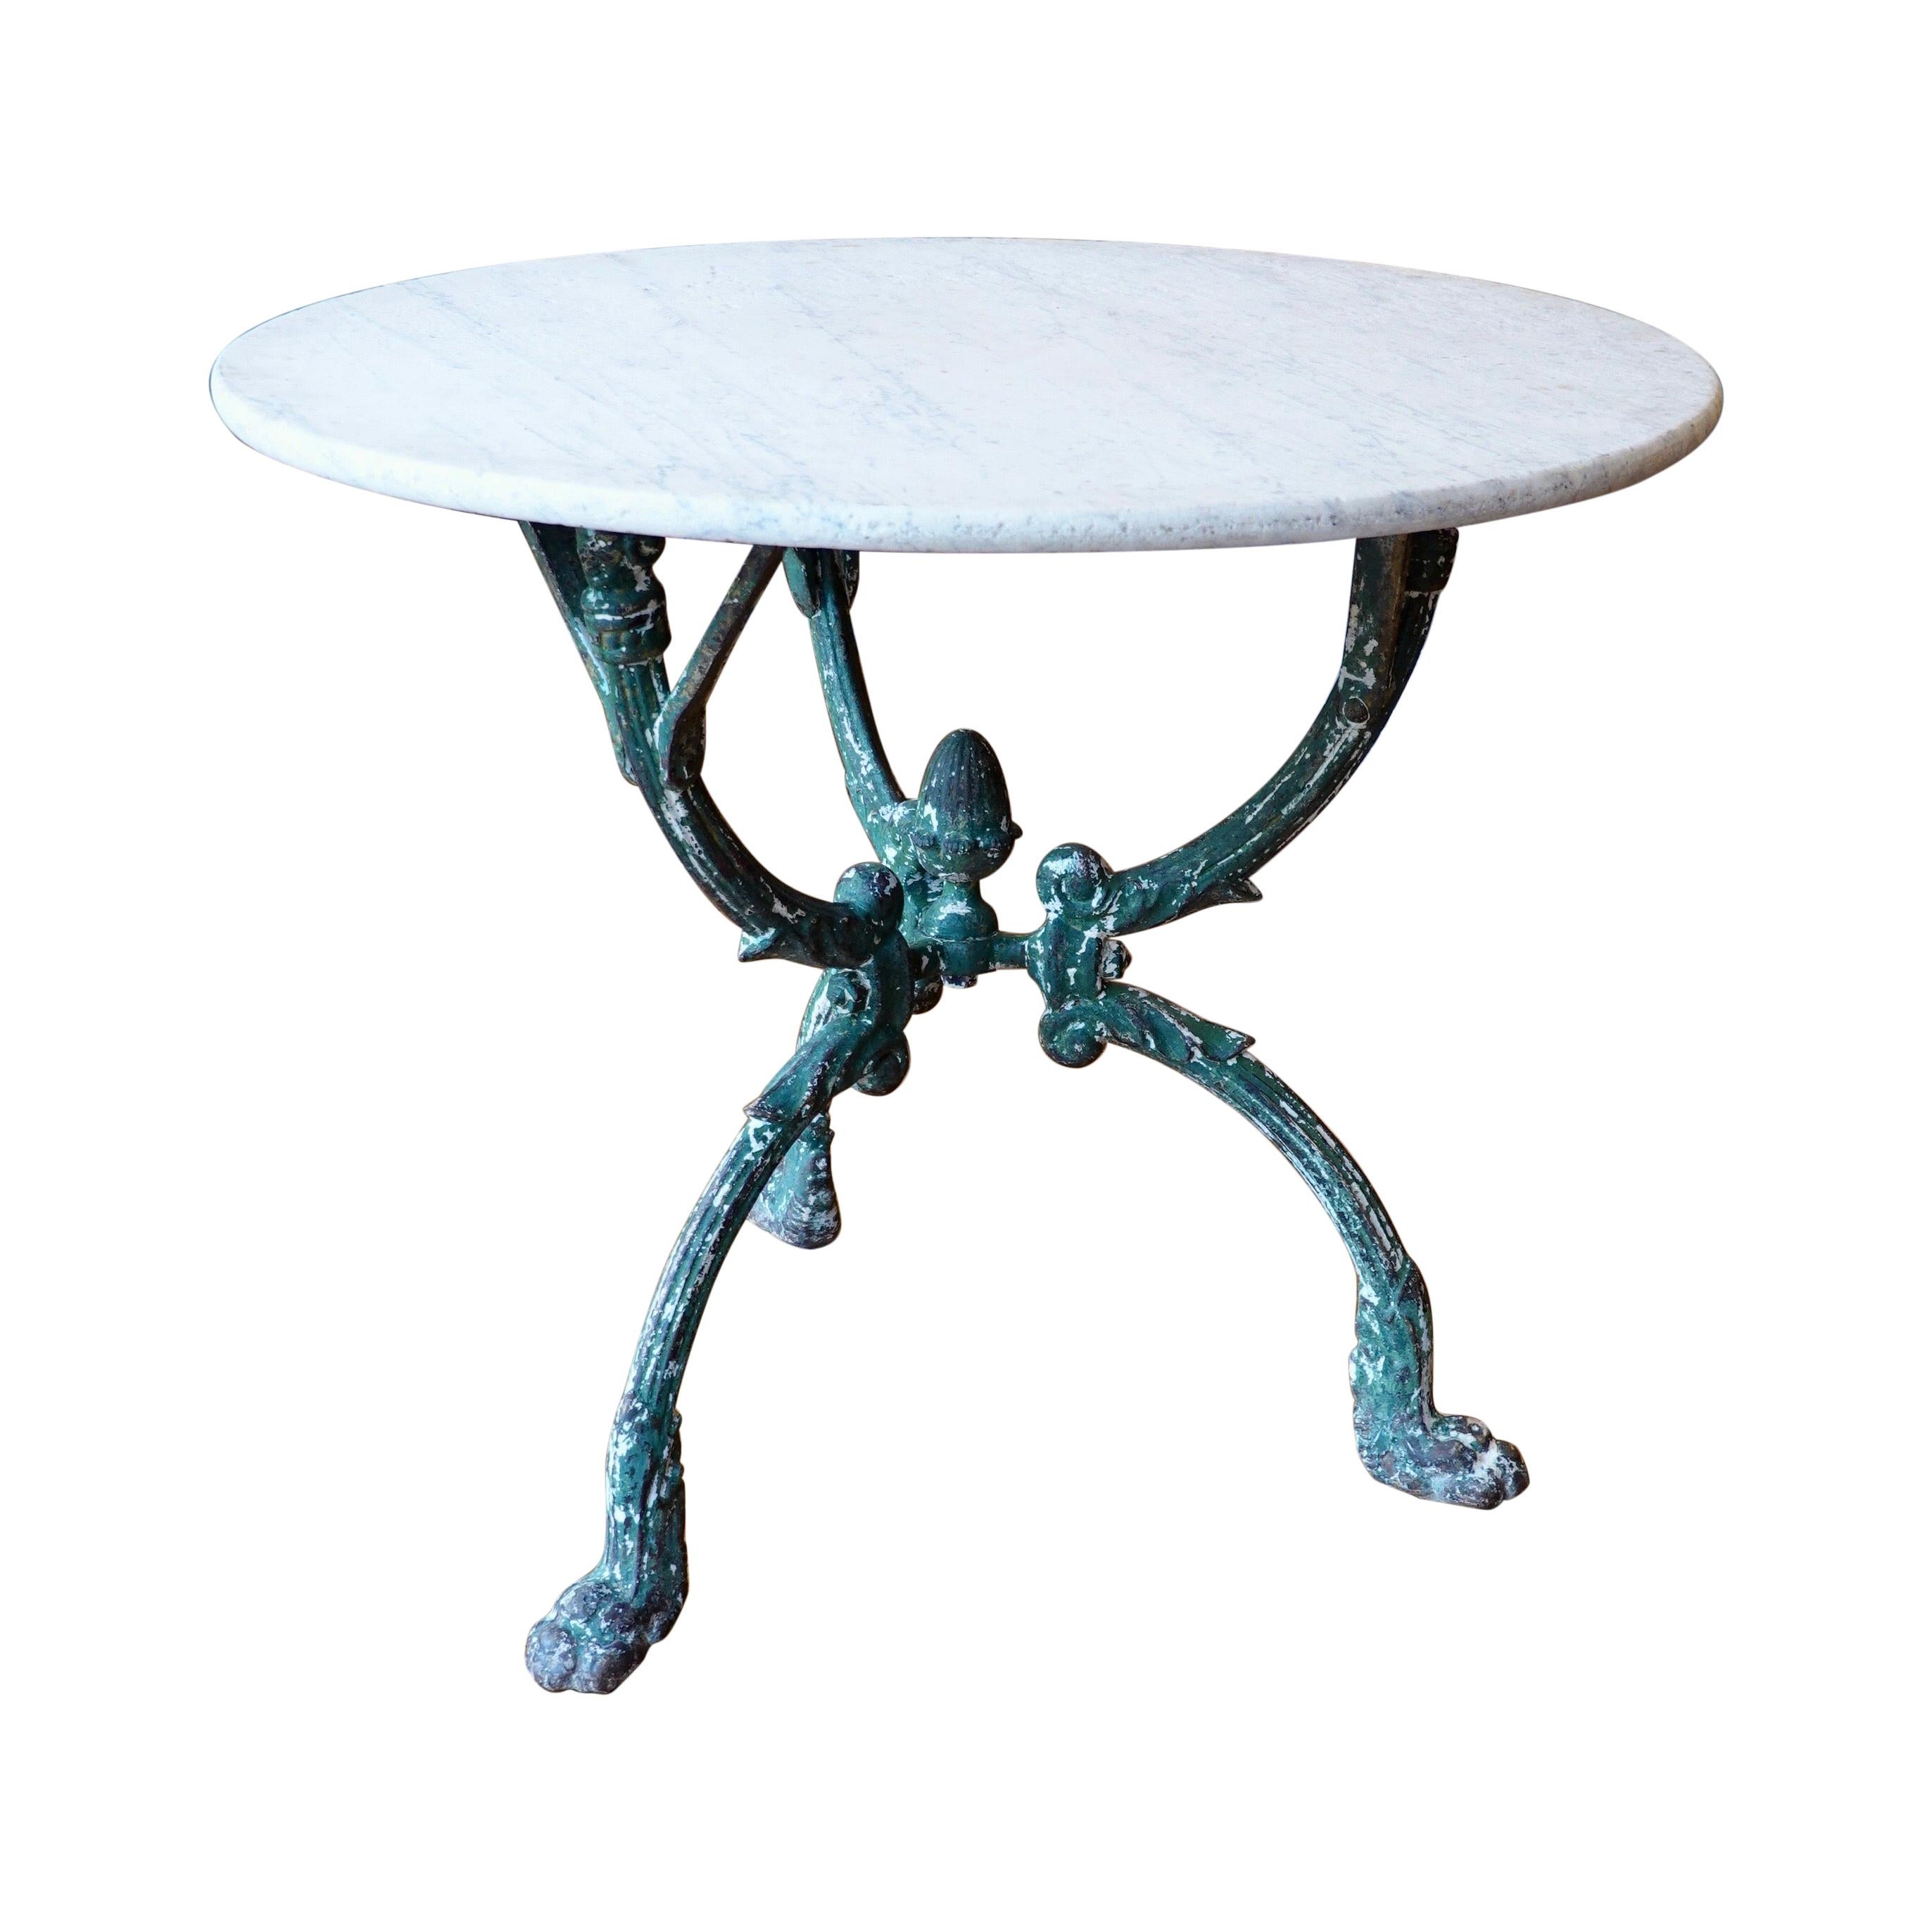 French Cast Iron Garden Table with Marble Top and Decorative Tripod Base